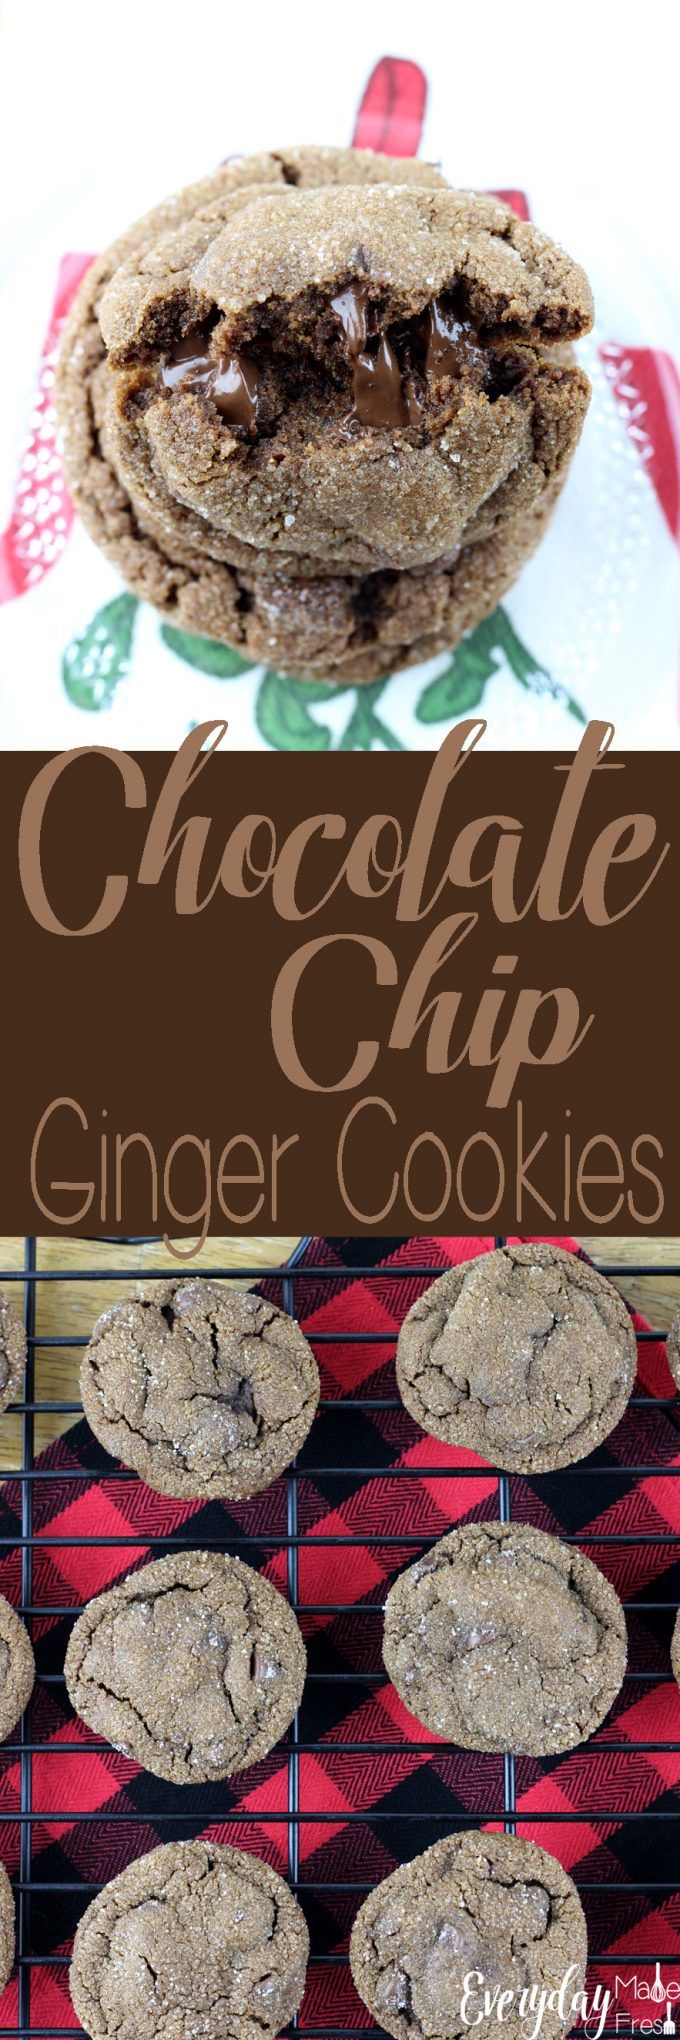 Chocolate chips stuffed inside of a cocoa ginger batter make these Chocolate Chip Ginger Cookies a holiday staple! | EverydayMadeFresh.com